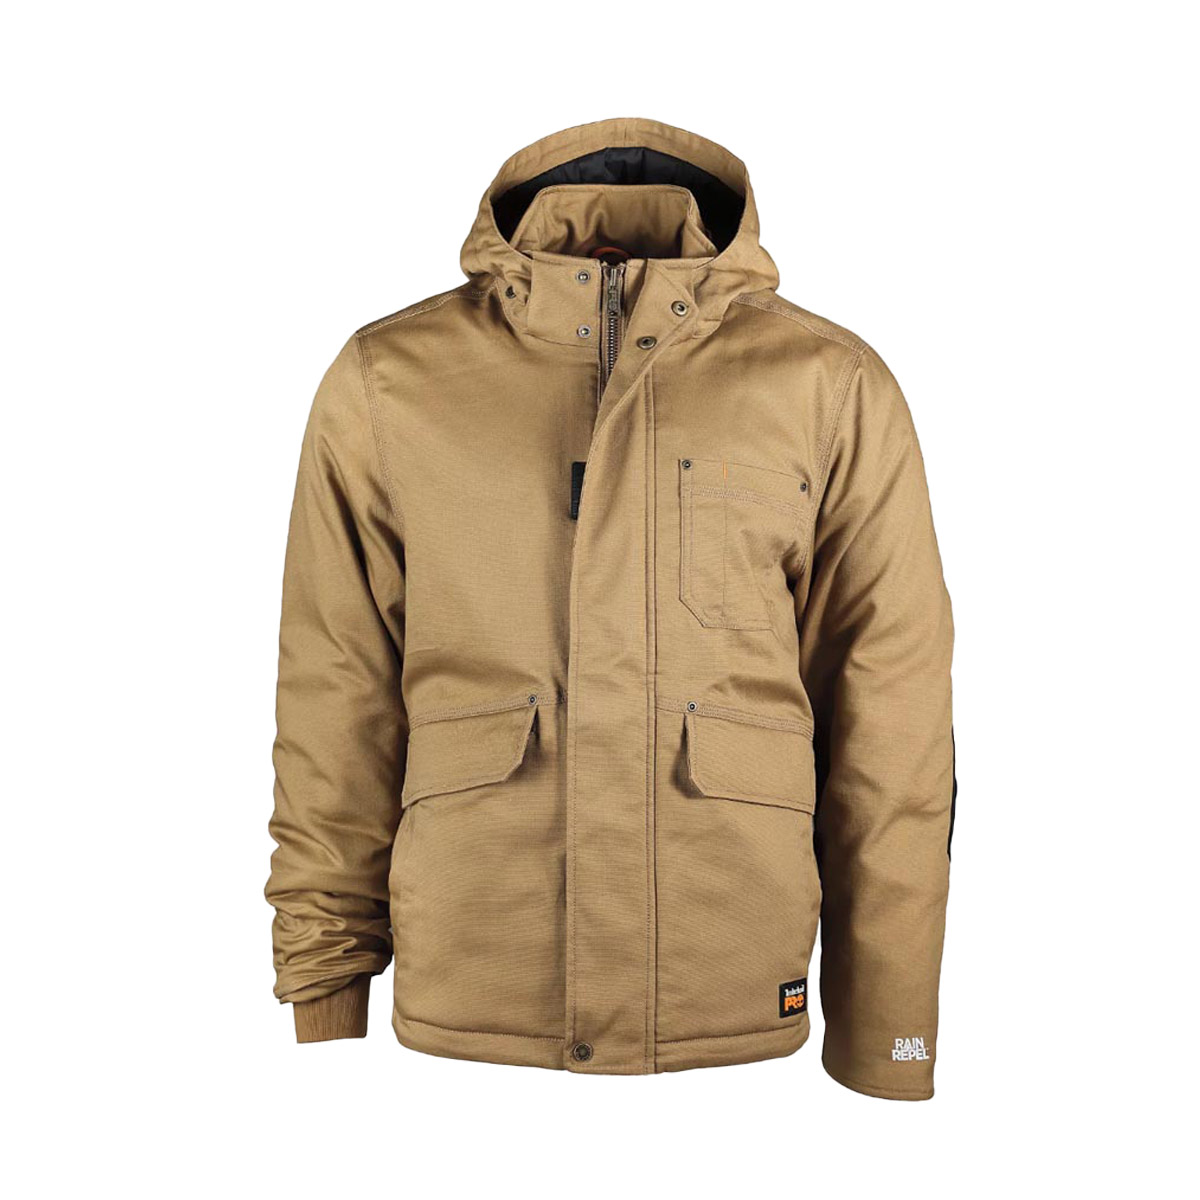 Timberland Men's Ironhide Hooded Insulated Jacket